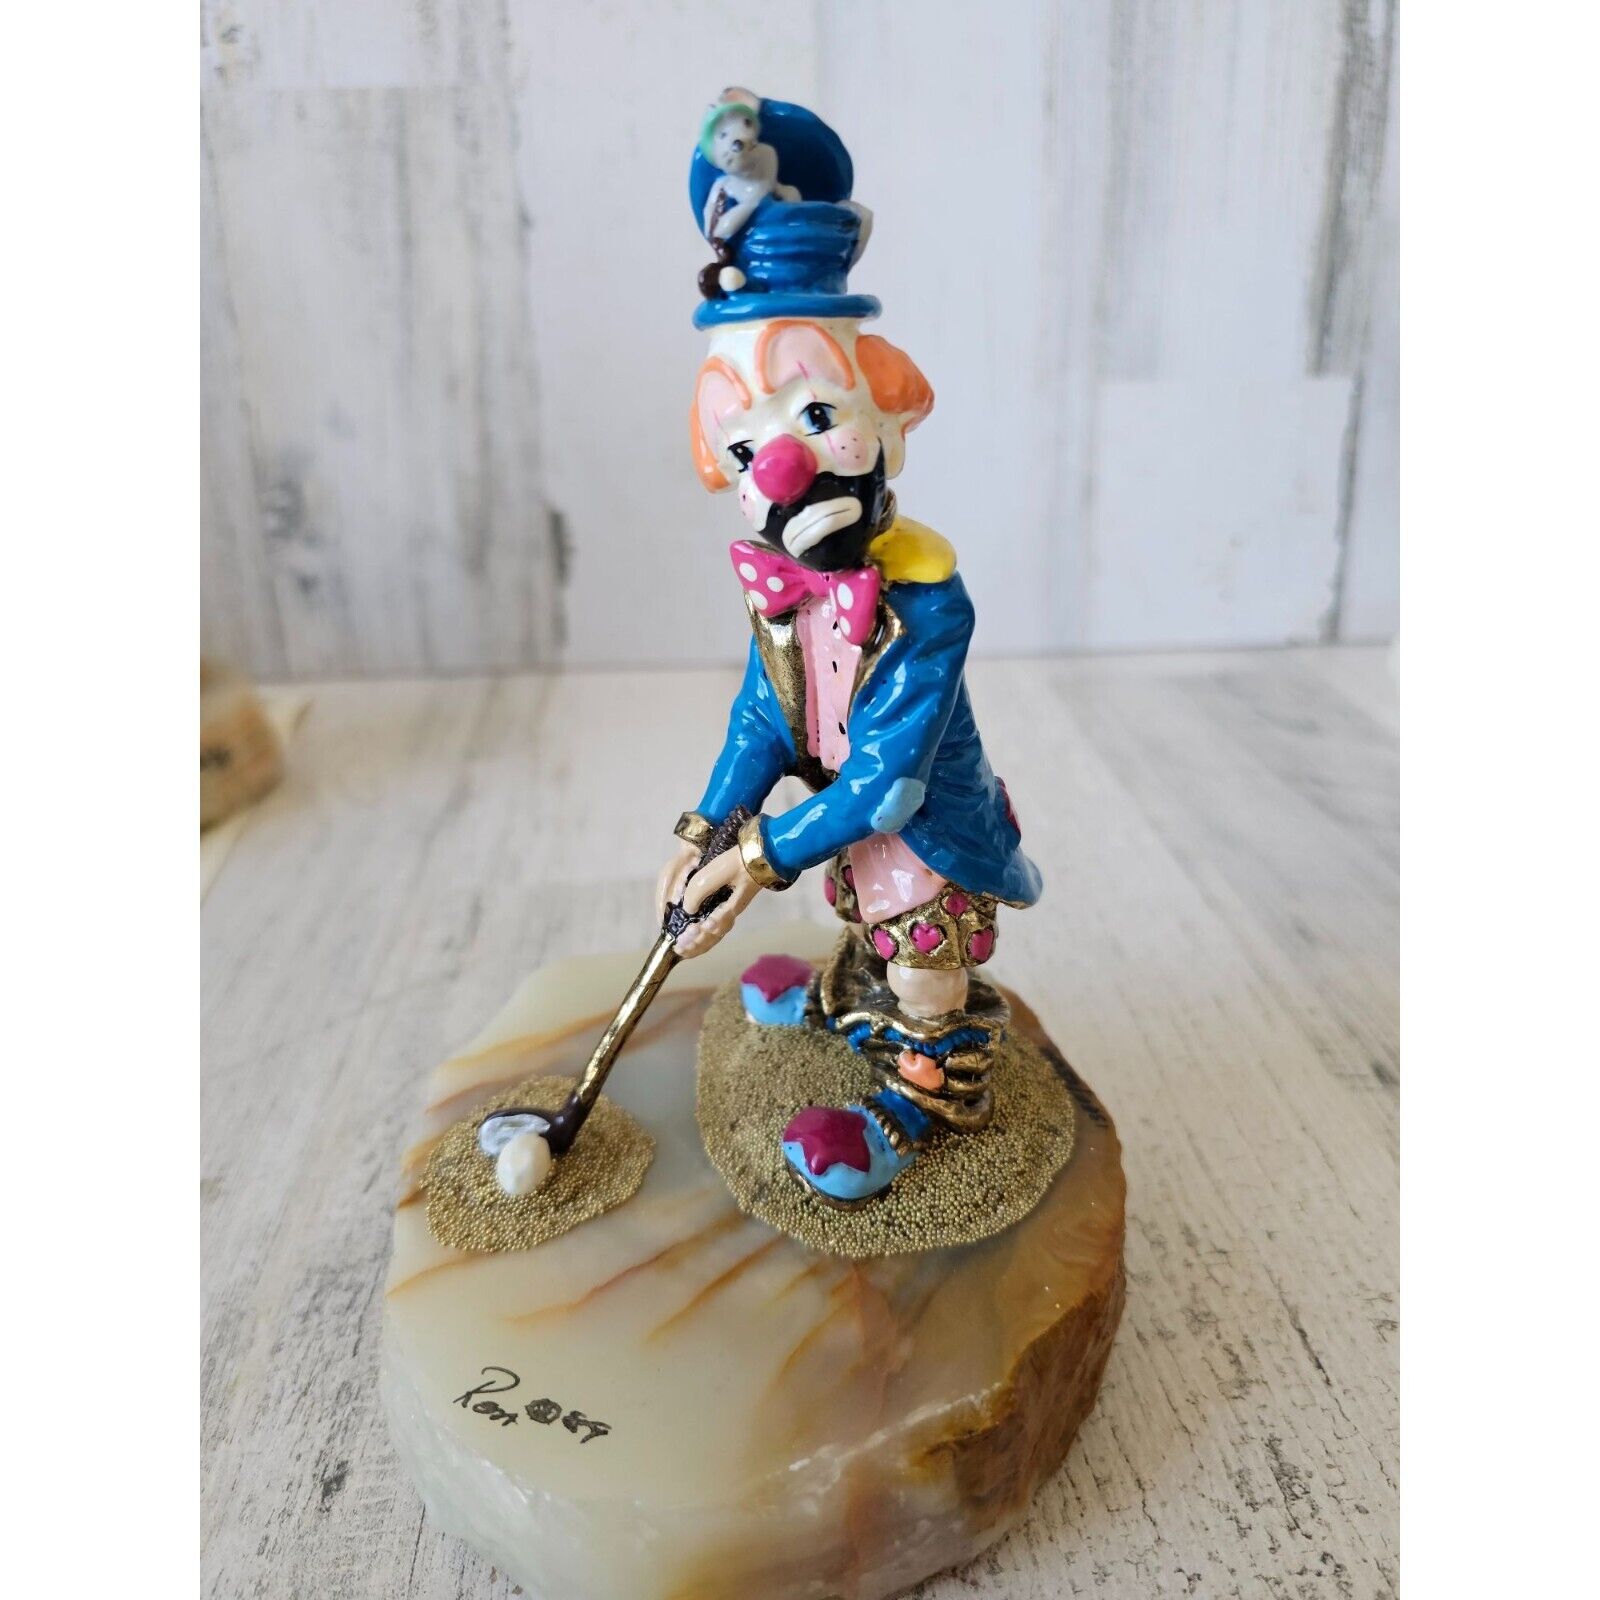 Ron Lee golf clown mouse circus golfer vintage 1989 gold statue figurine